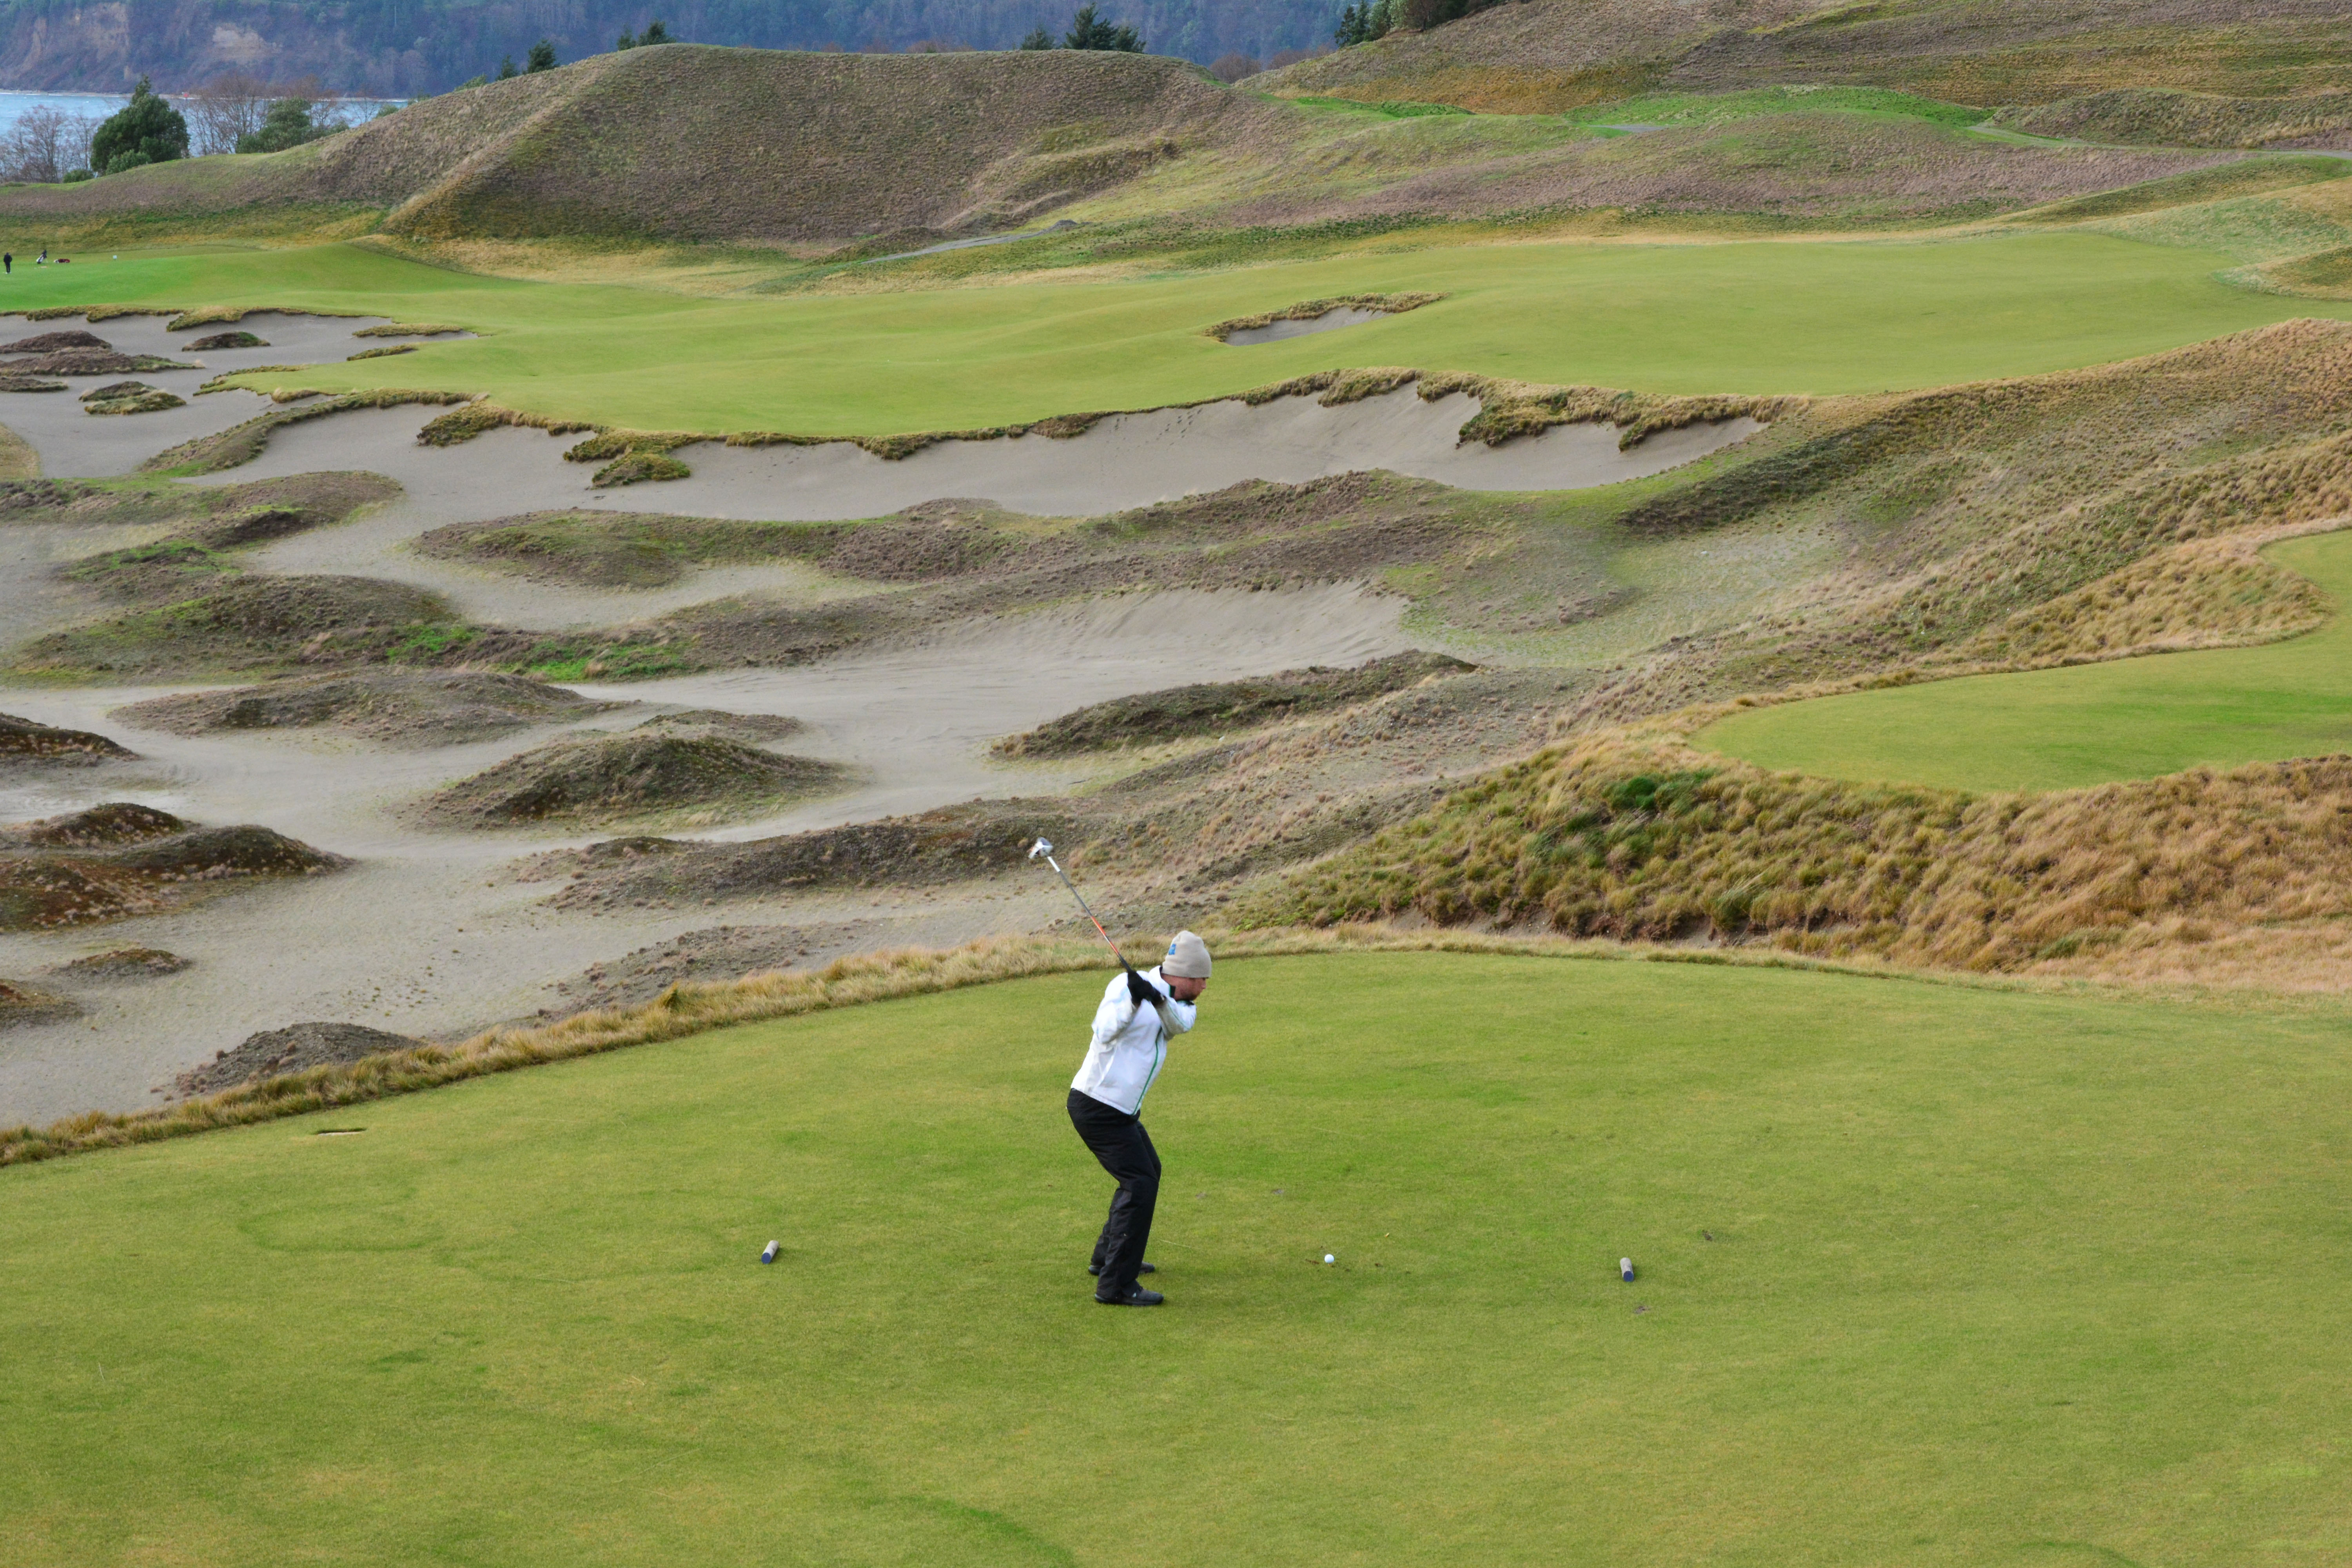 Me on the 14th hole at Chambers Bay in December wearing my Galvin Green jacket.